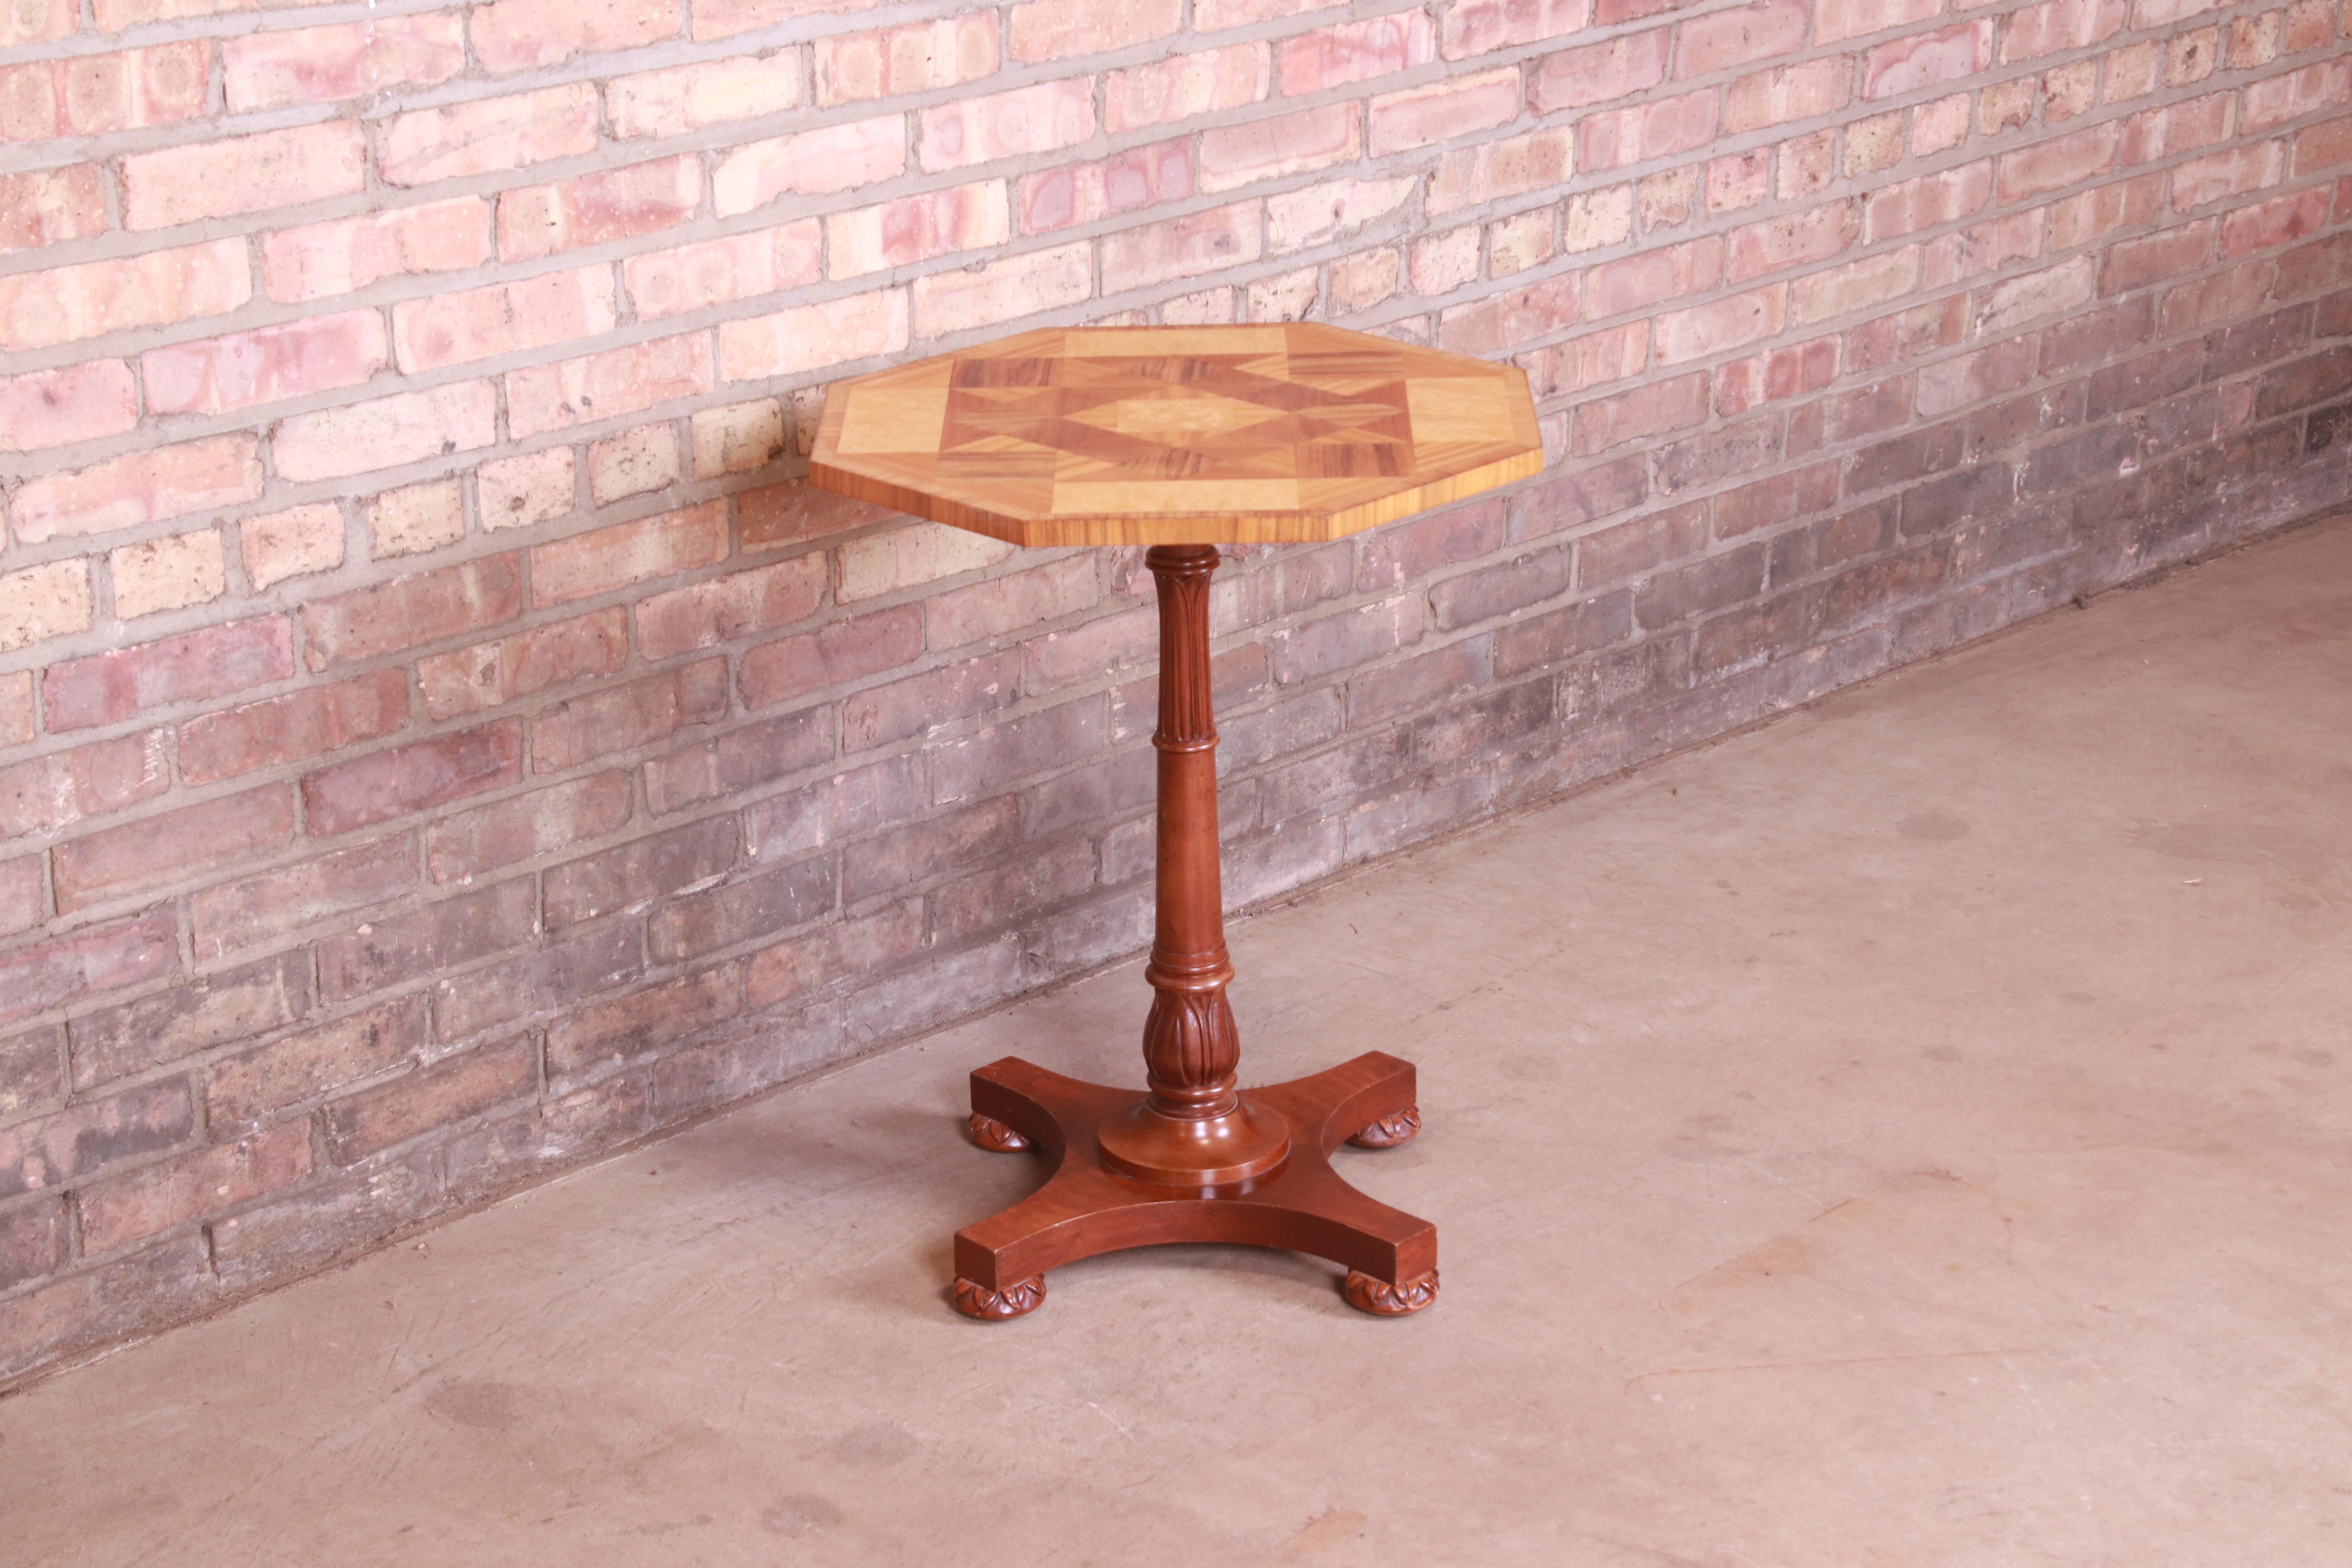 An exceptional neoclassical or Regency style pedestal tea table or occasional side table

By Baker Furniture

USA, Circa 1980s

Carved cherry wood pedestal, with outstanding inlaid marquetry top in walnut, satinwood, and burled olive